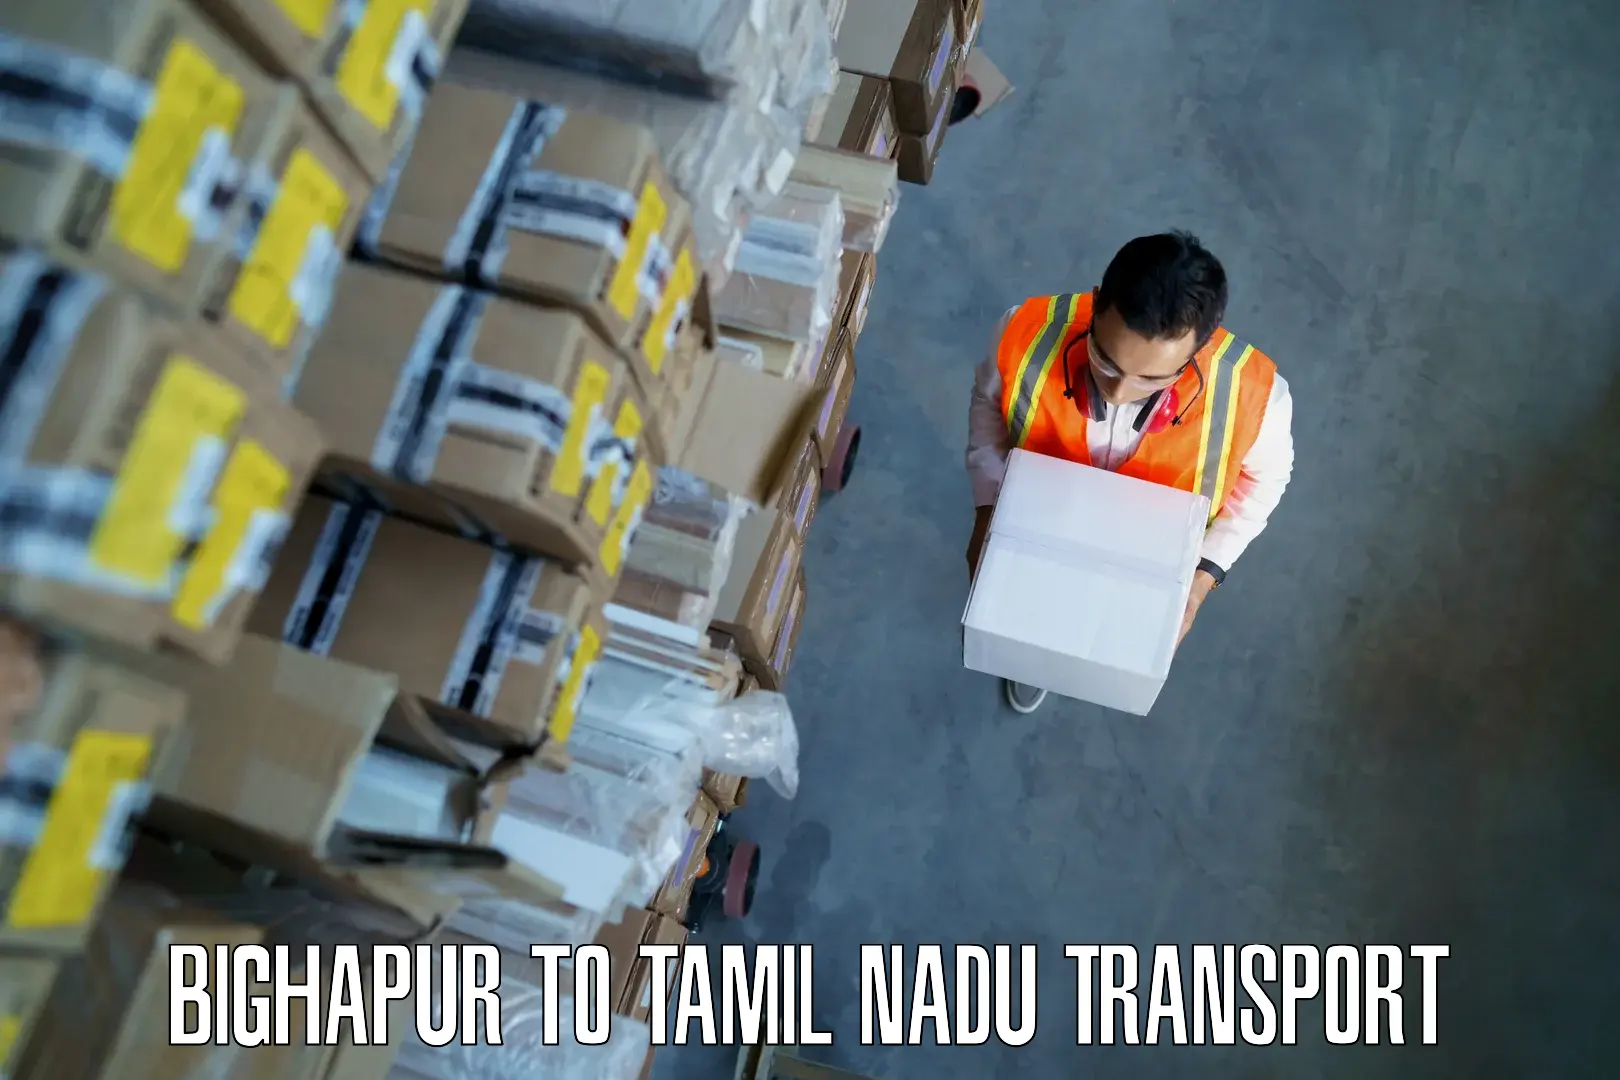 Vehicle transport services Bighapur to Ennore Port Chennai